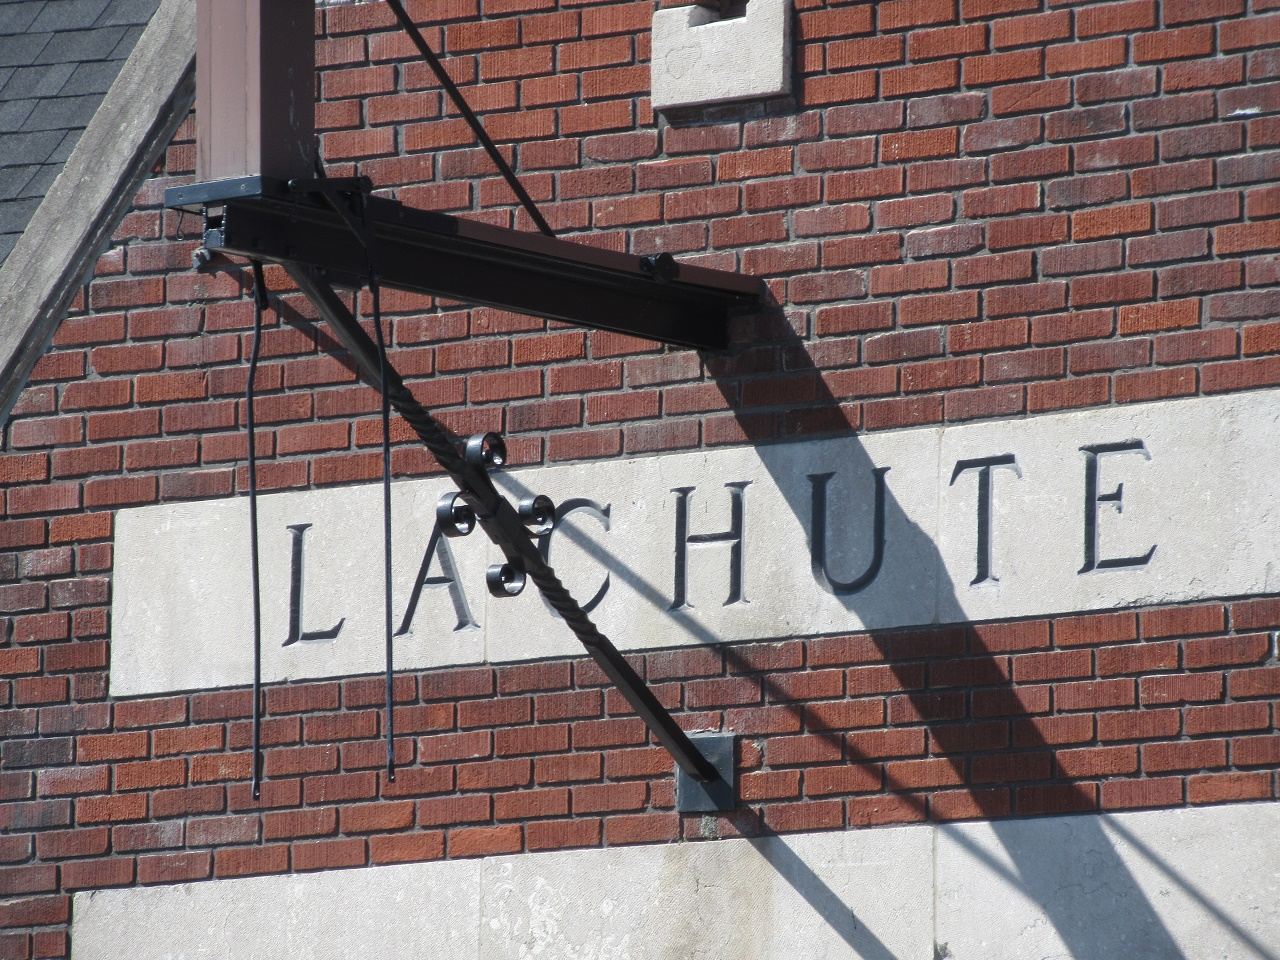 Lachute switching streetlights to LED